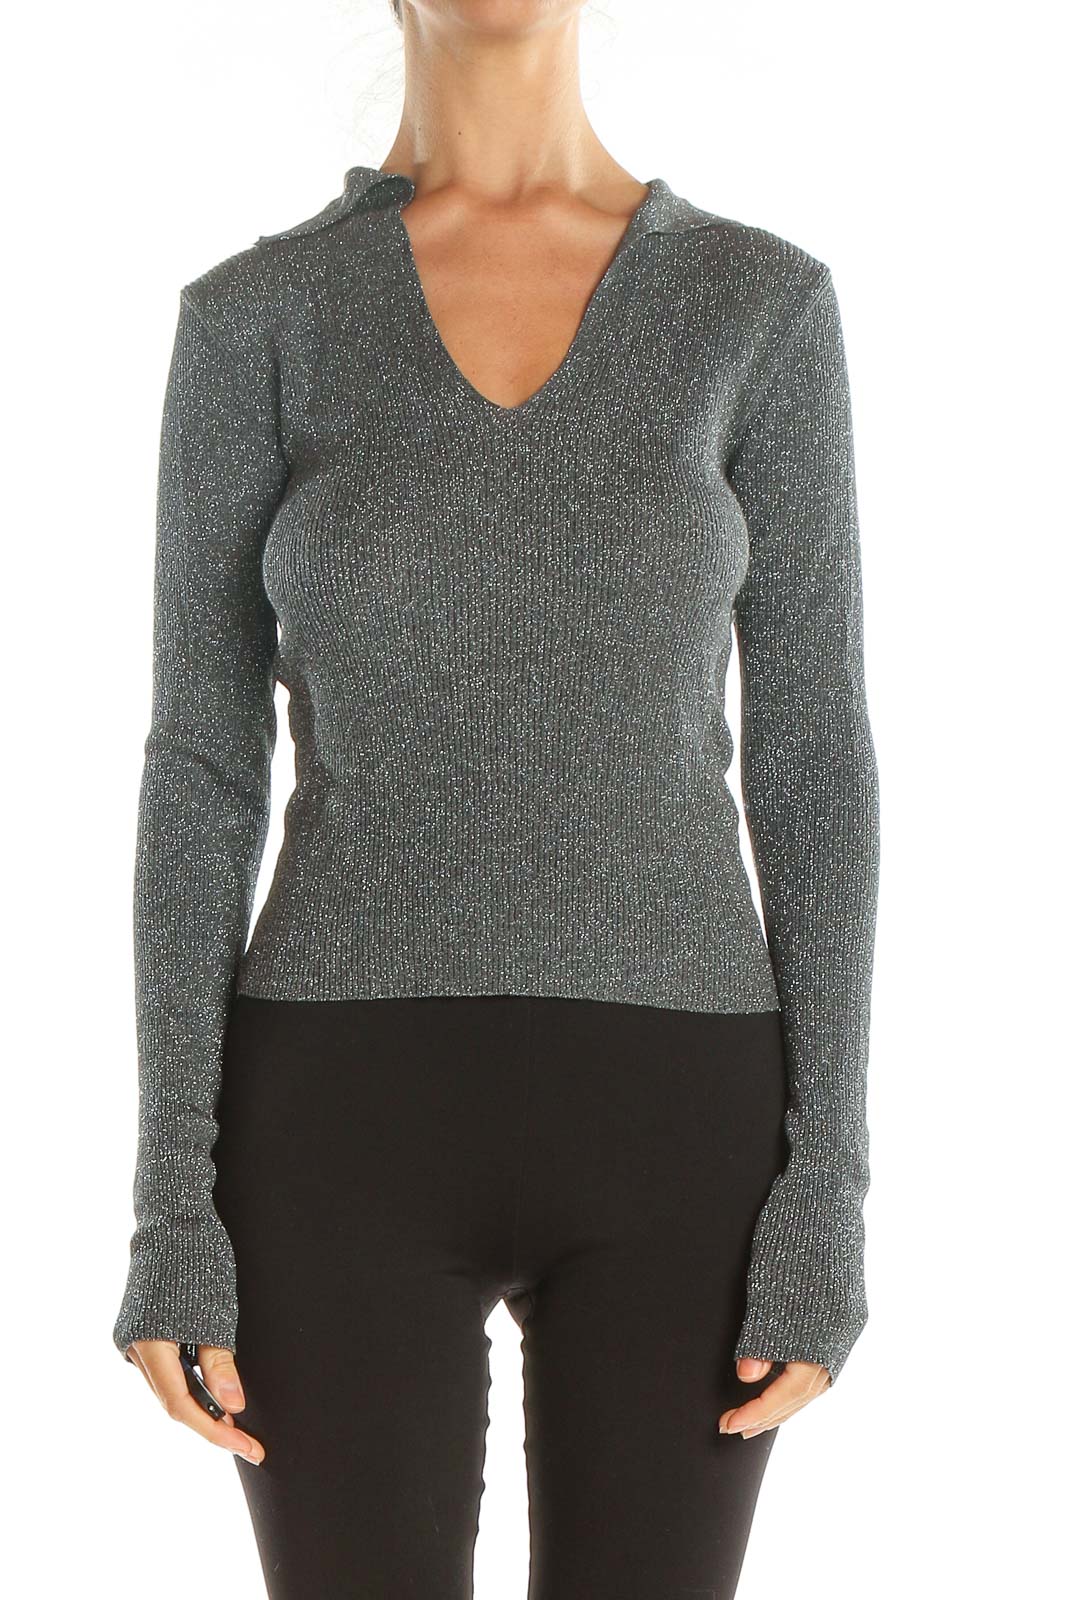 Gray Shimmer Party Top Front